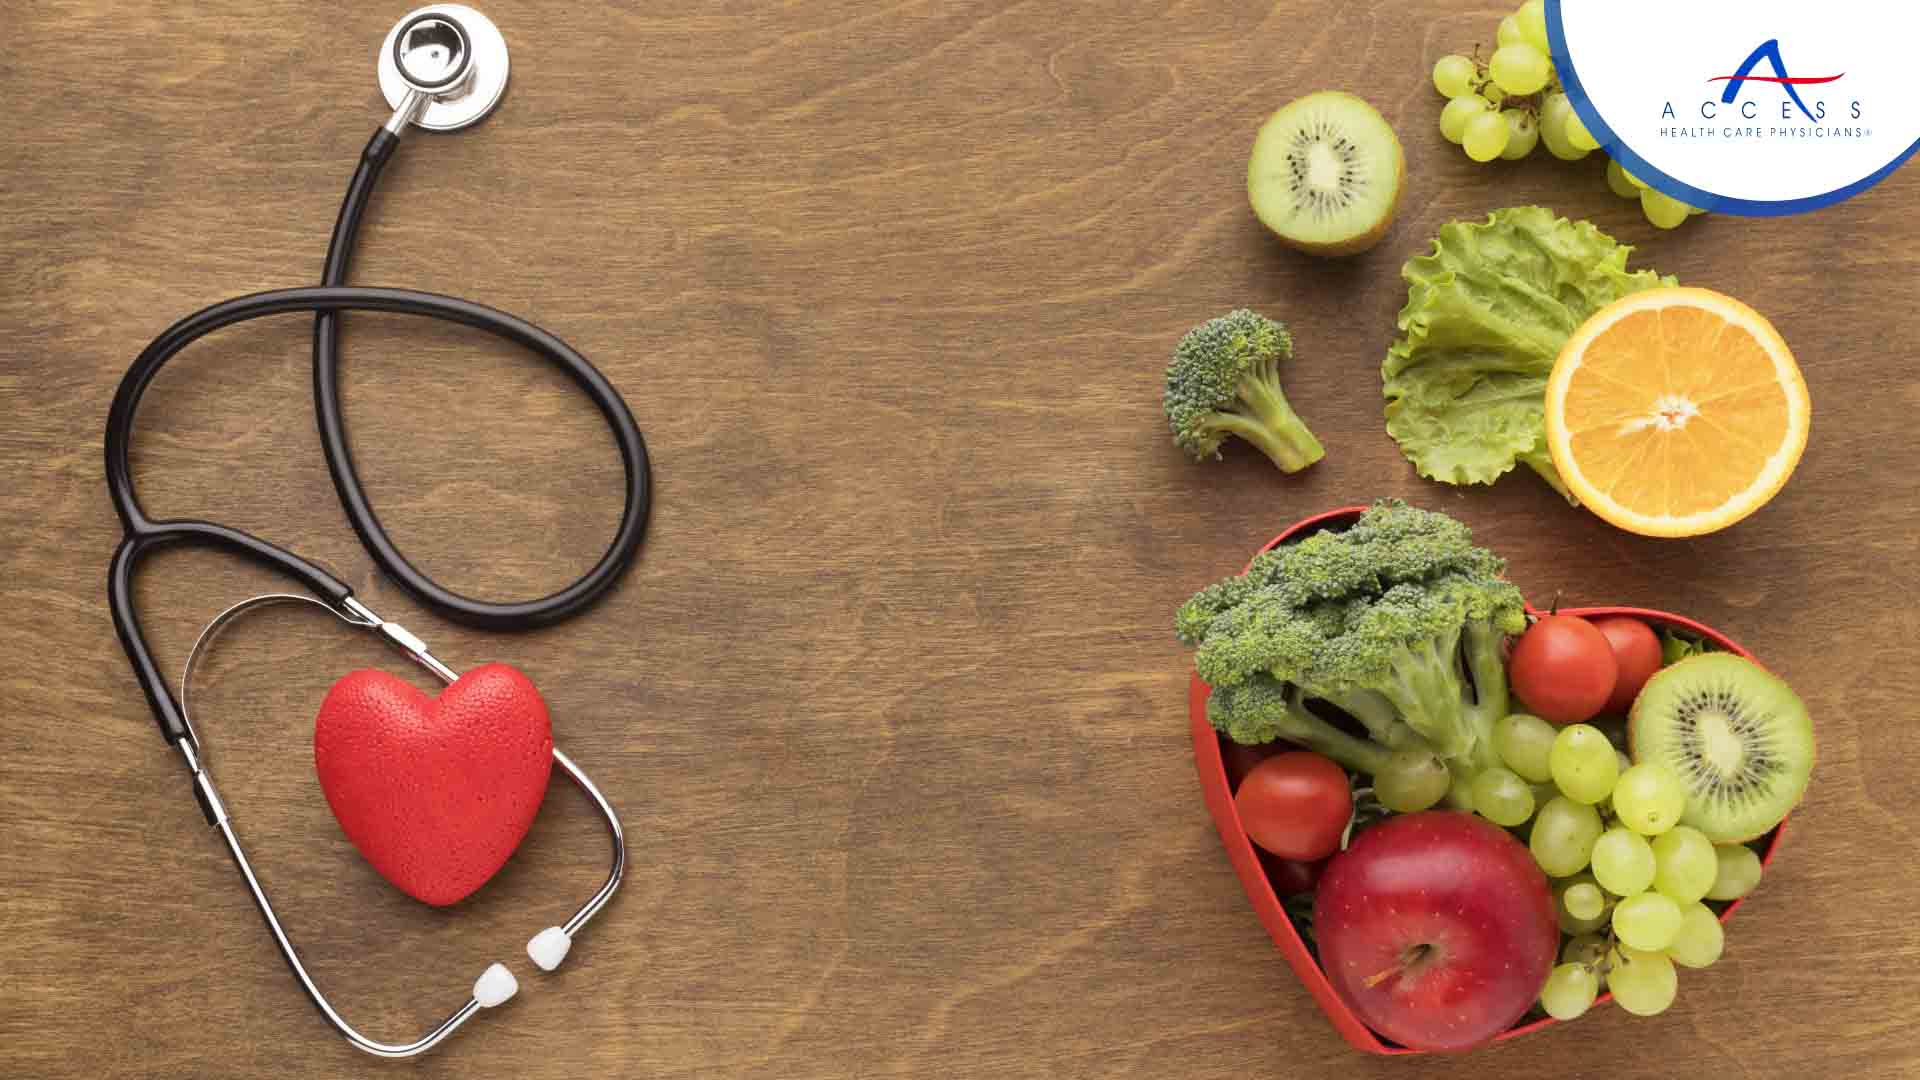 Food and Heart: Building a Healthy Connection